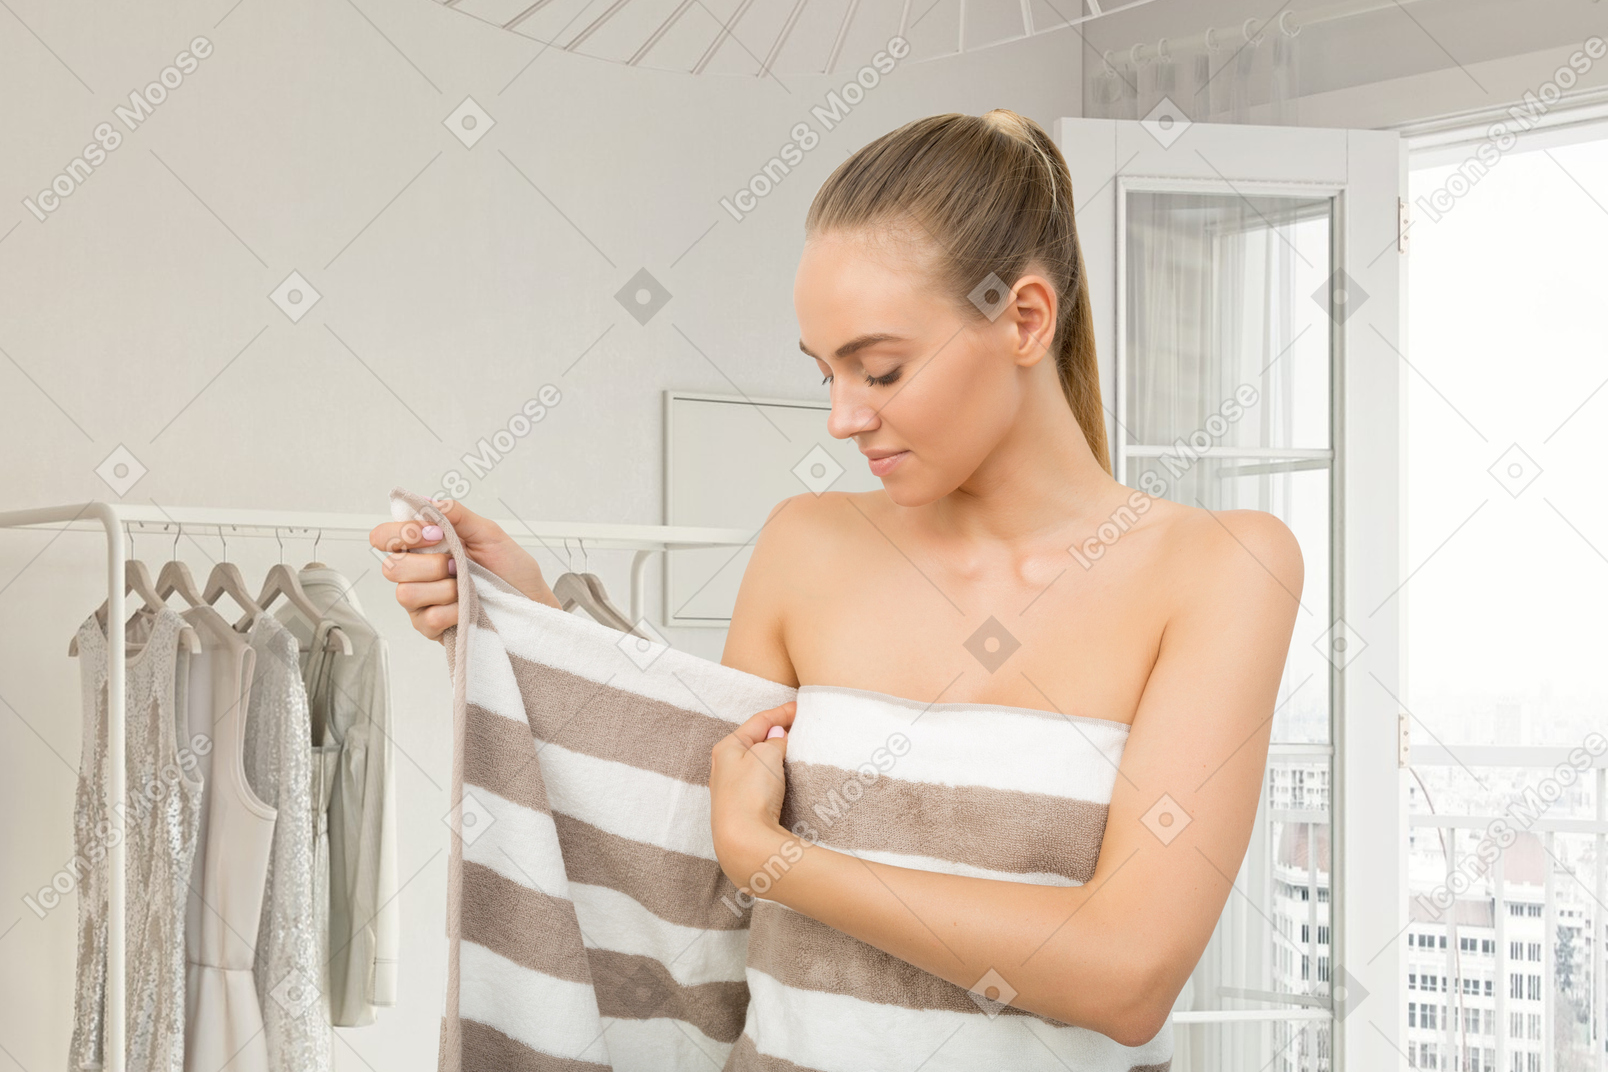 A woman in a bathroom wrapping herself in towel